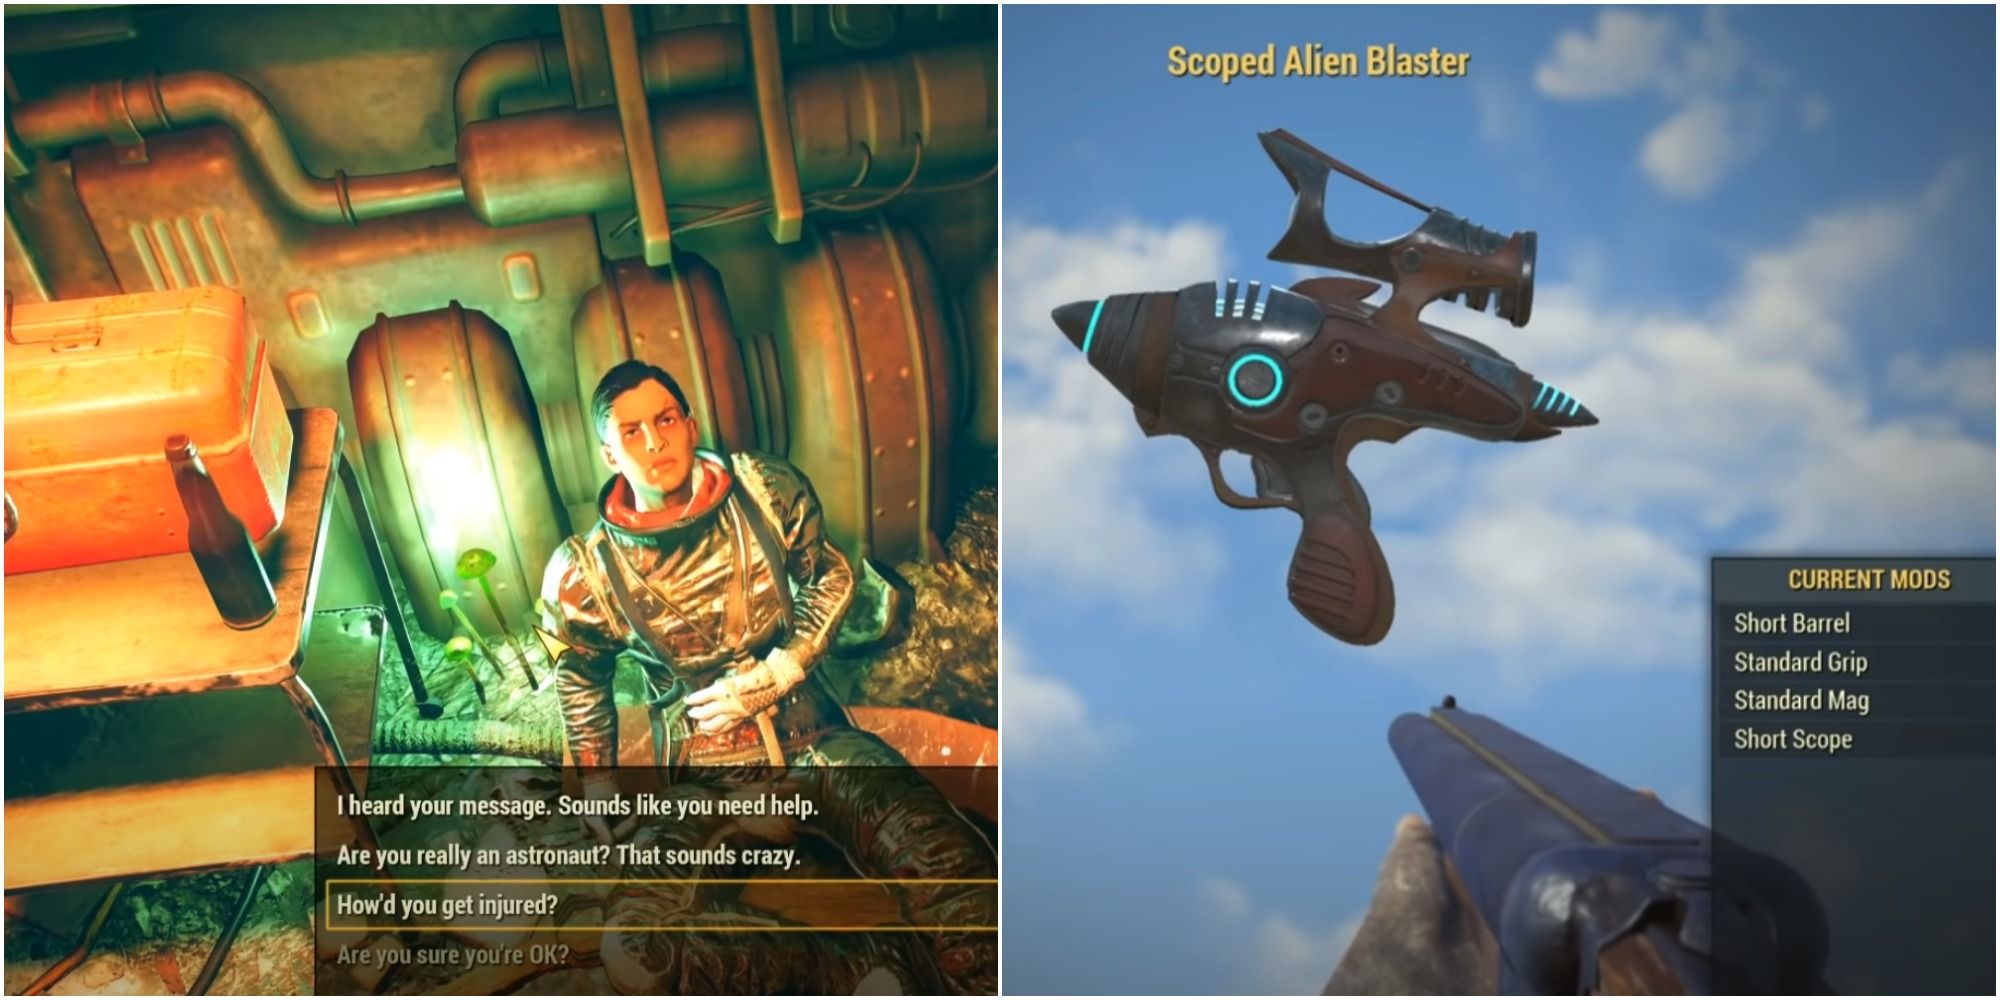 Fallout 76: To Get The Alien Blaster